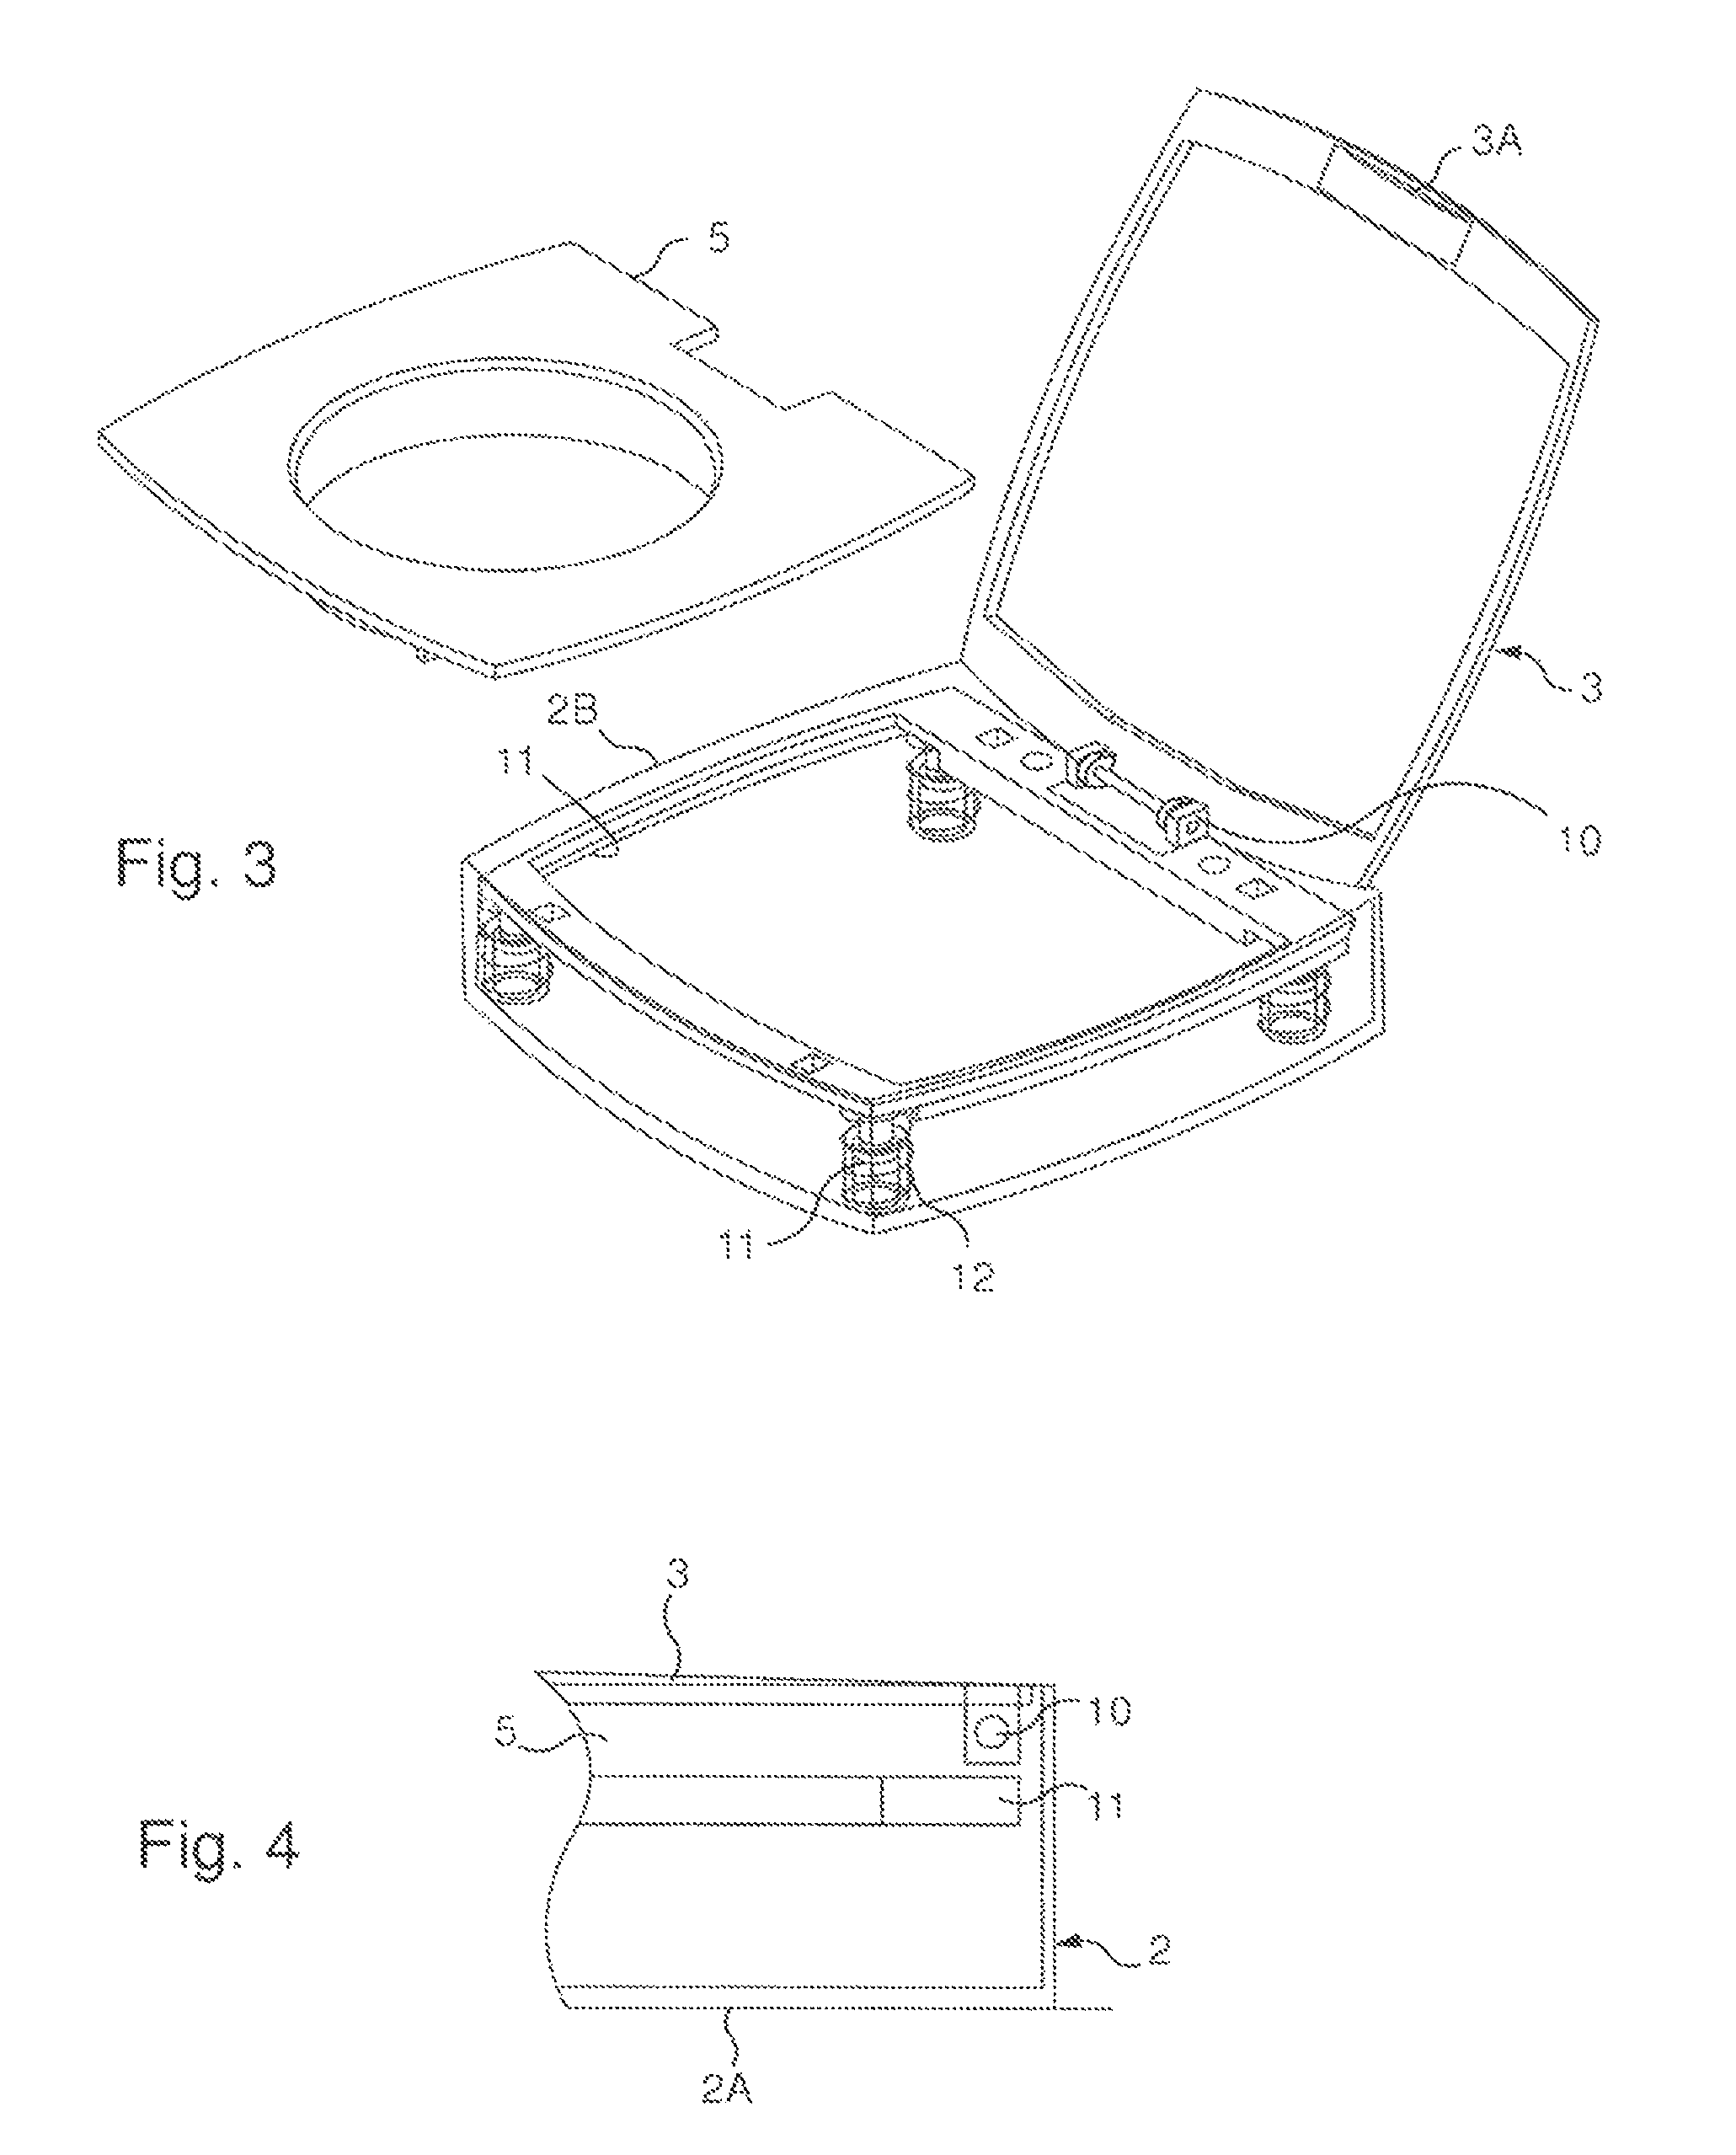 Case for cosmetic or body hygiene product having a retractable hinge